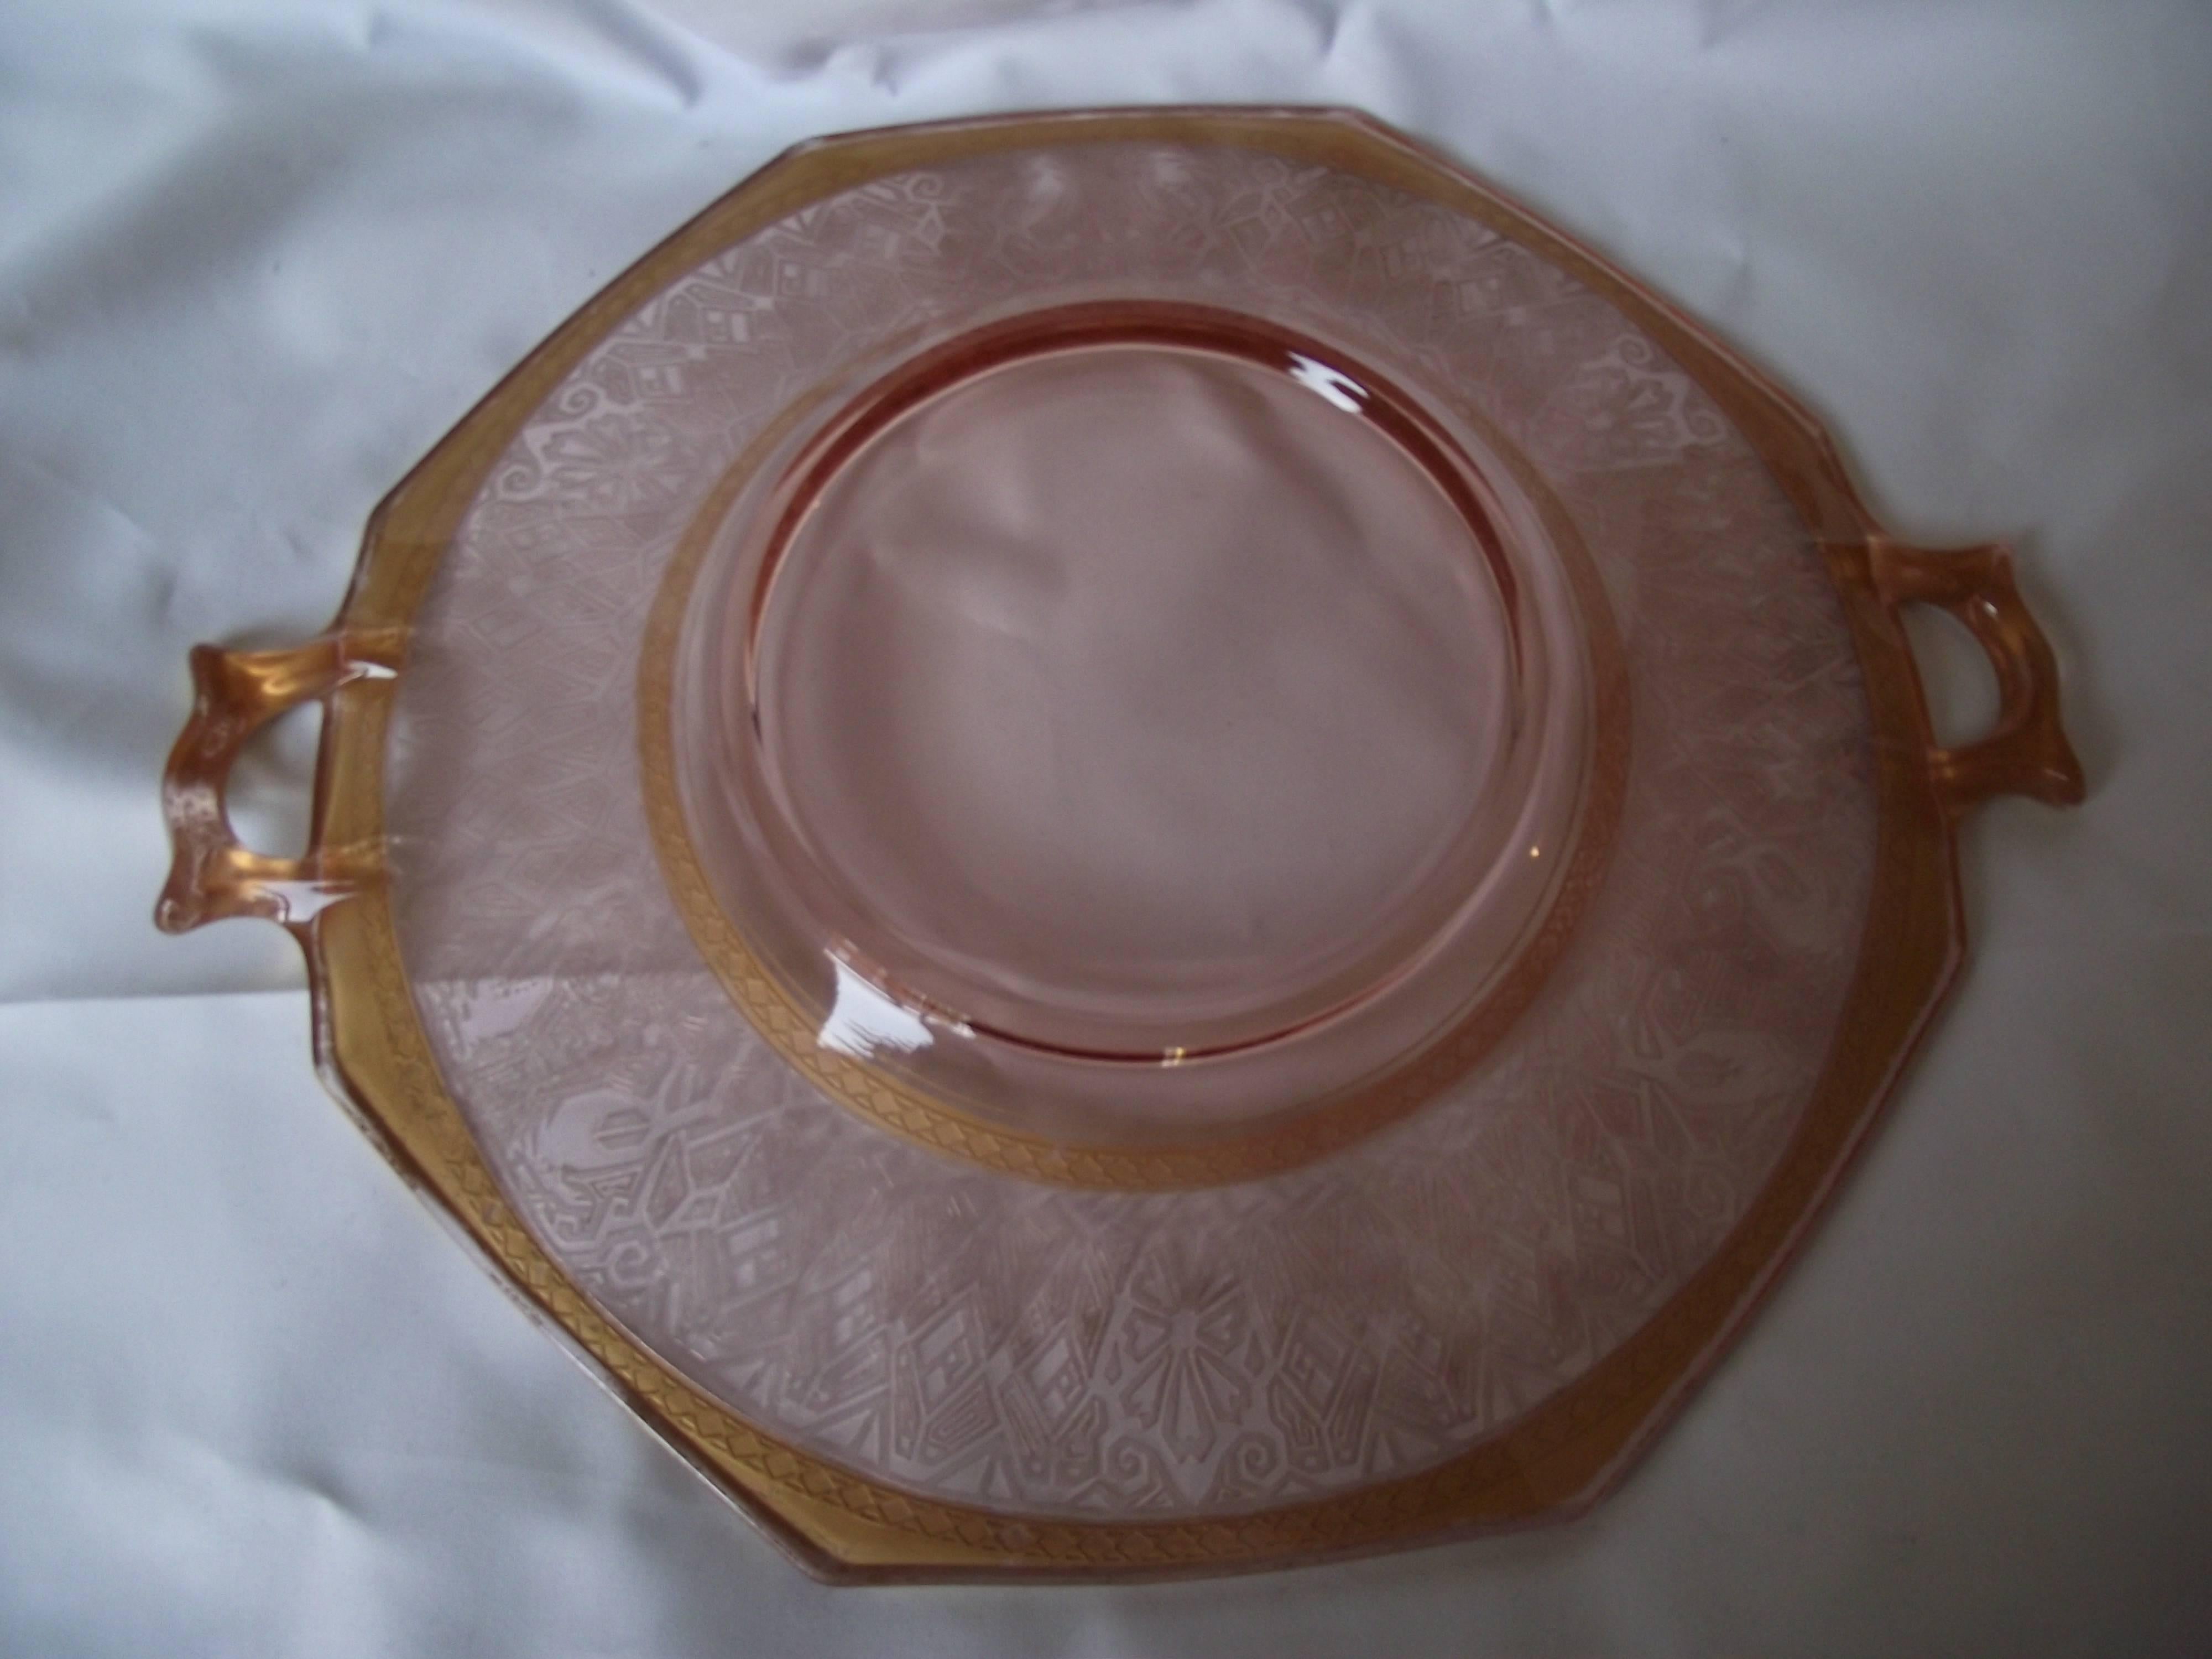 So many beautiful design elements are incorporated into this plate.

It has an octagonal shape with gold handles. The inner shape is round and is decorated with a wide faux etched glass, Egyptian style border.

Two bands of applied gold diamonds